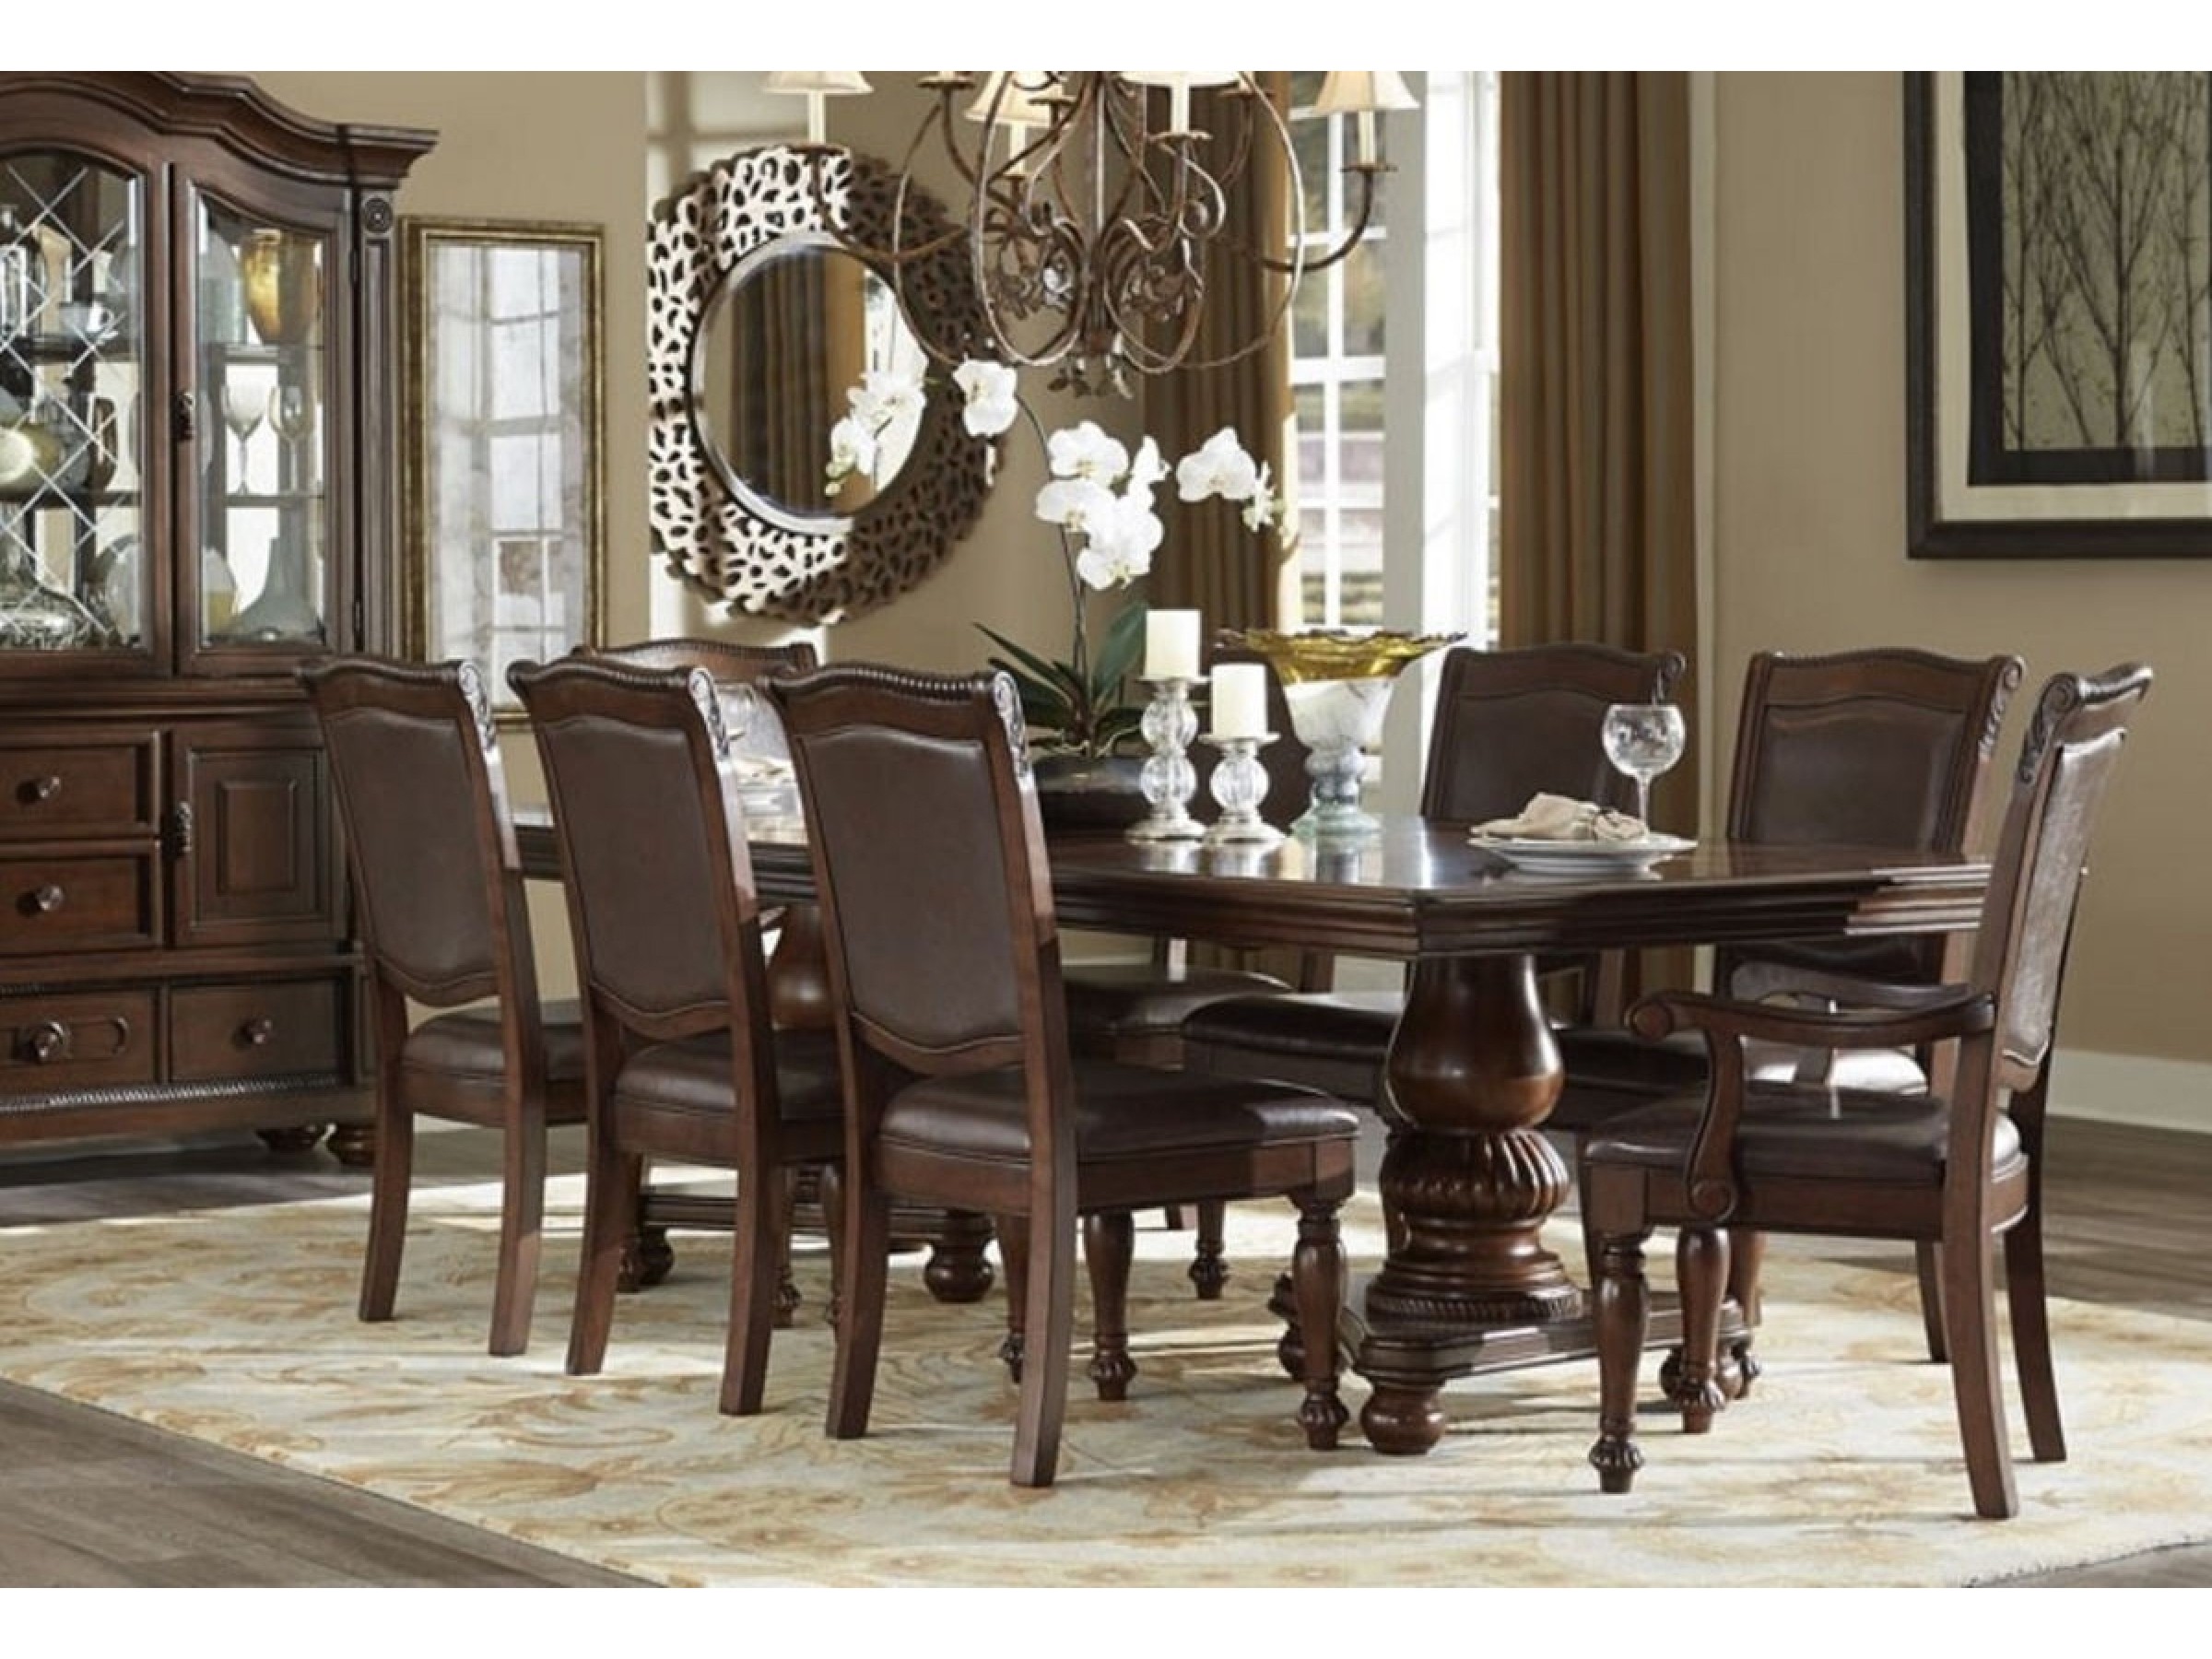 77he547377, Formal Dining Room Table And Chairs